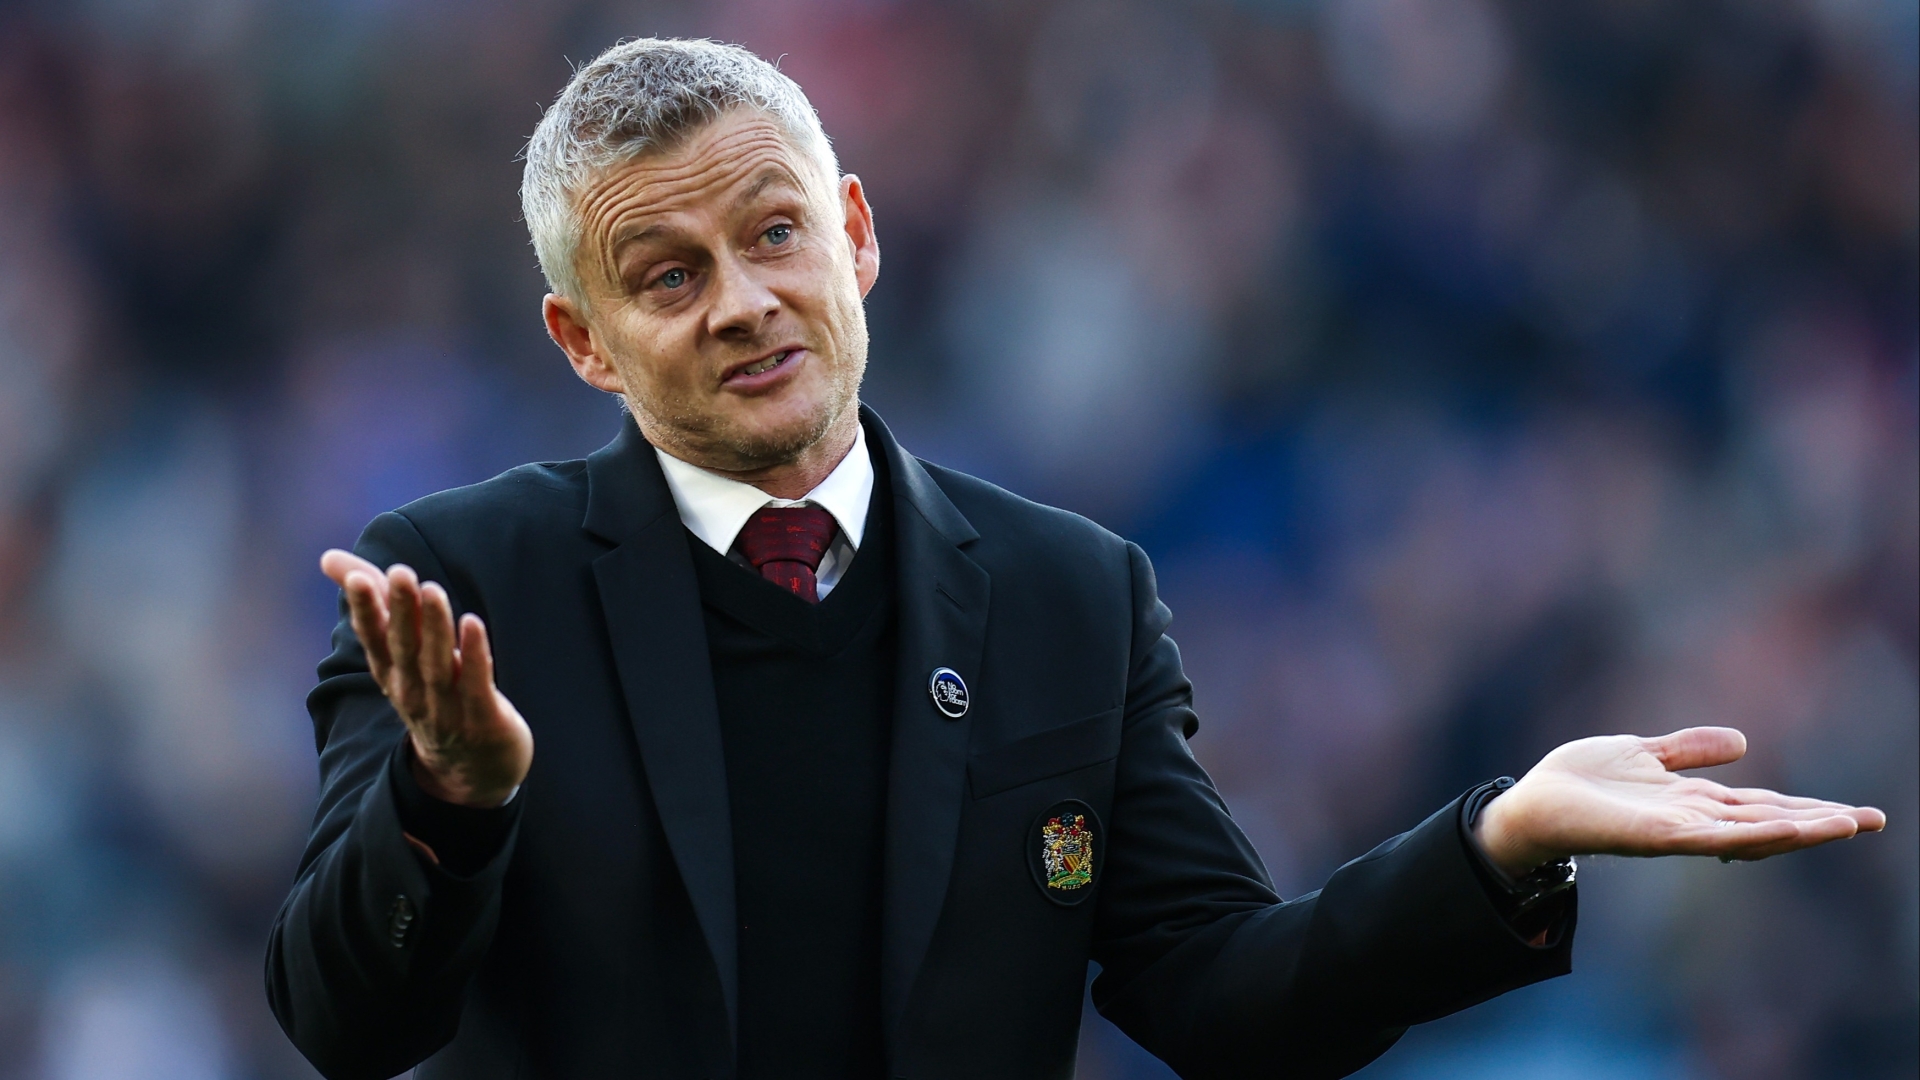 'Shot to pieces' - Roy Keane says Man Utd would be better off with Solskjaer